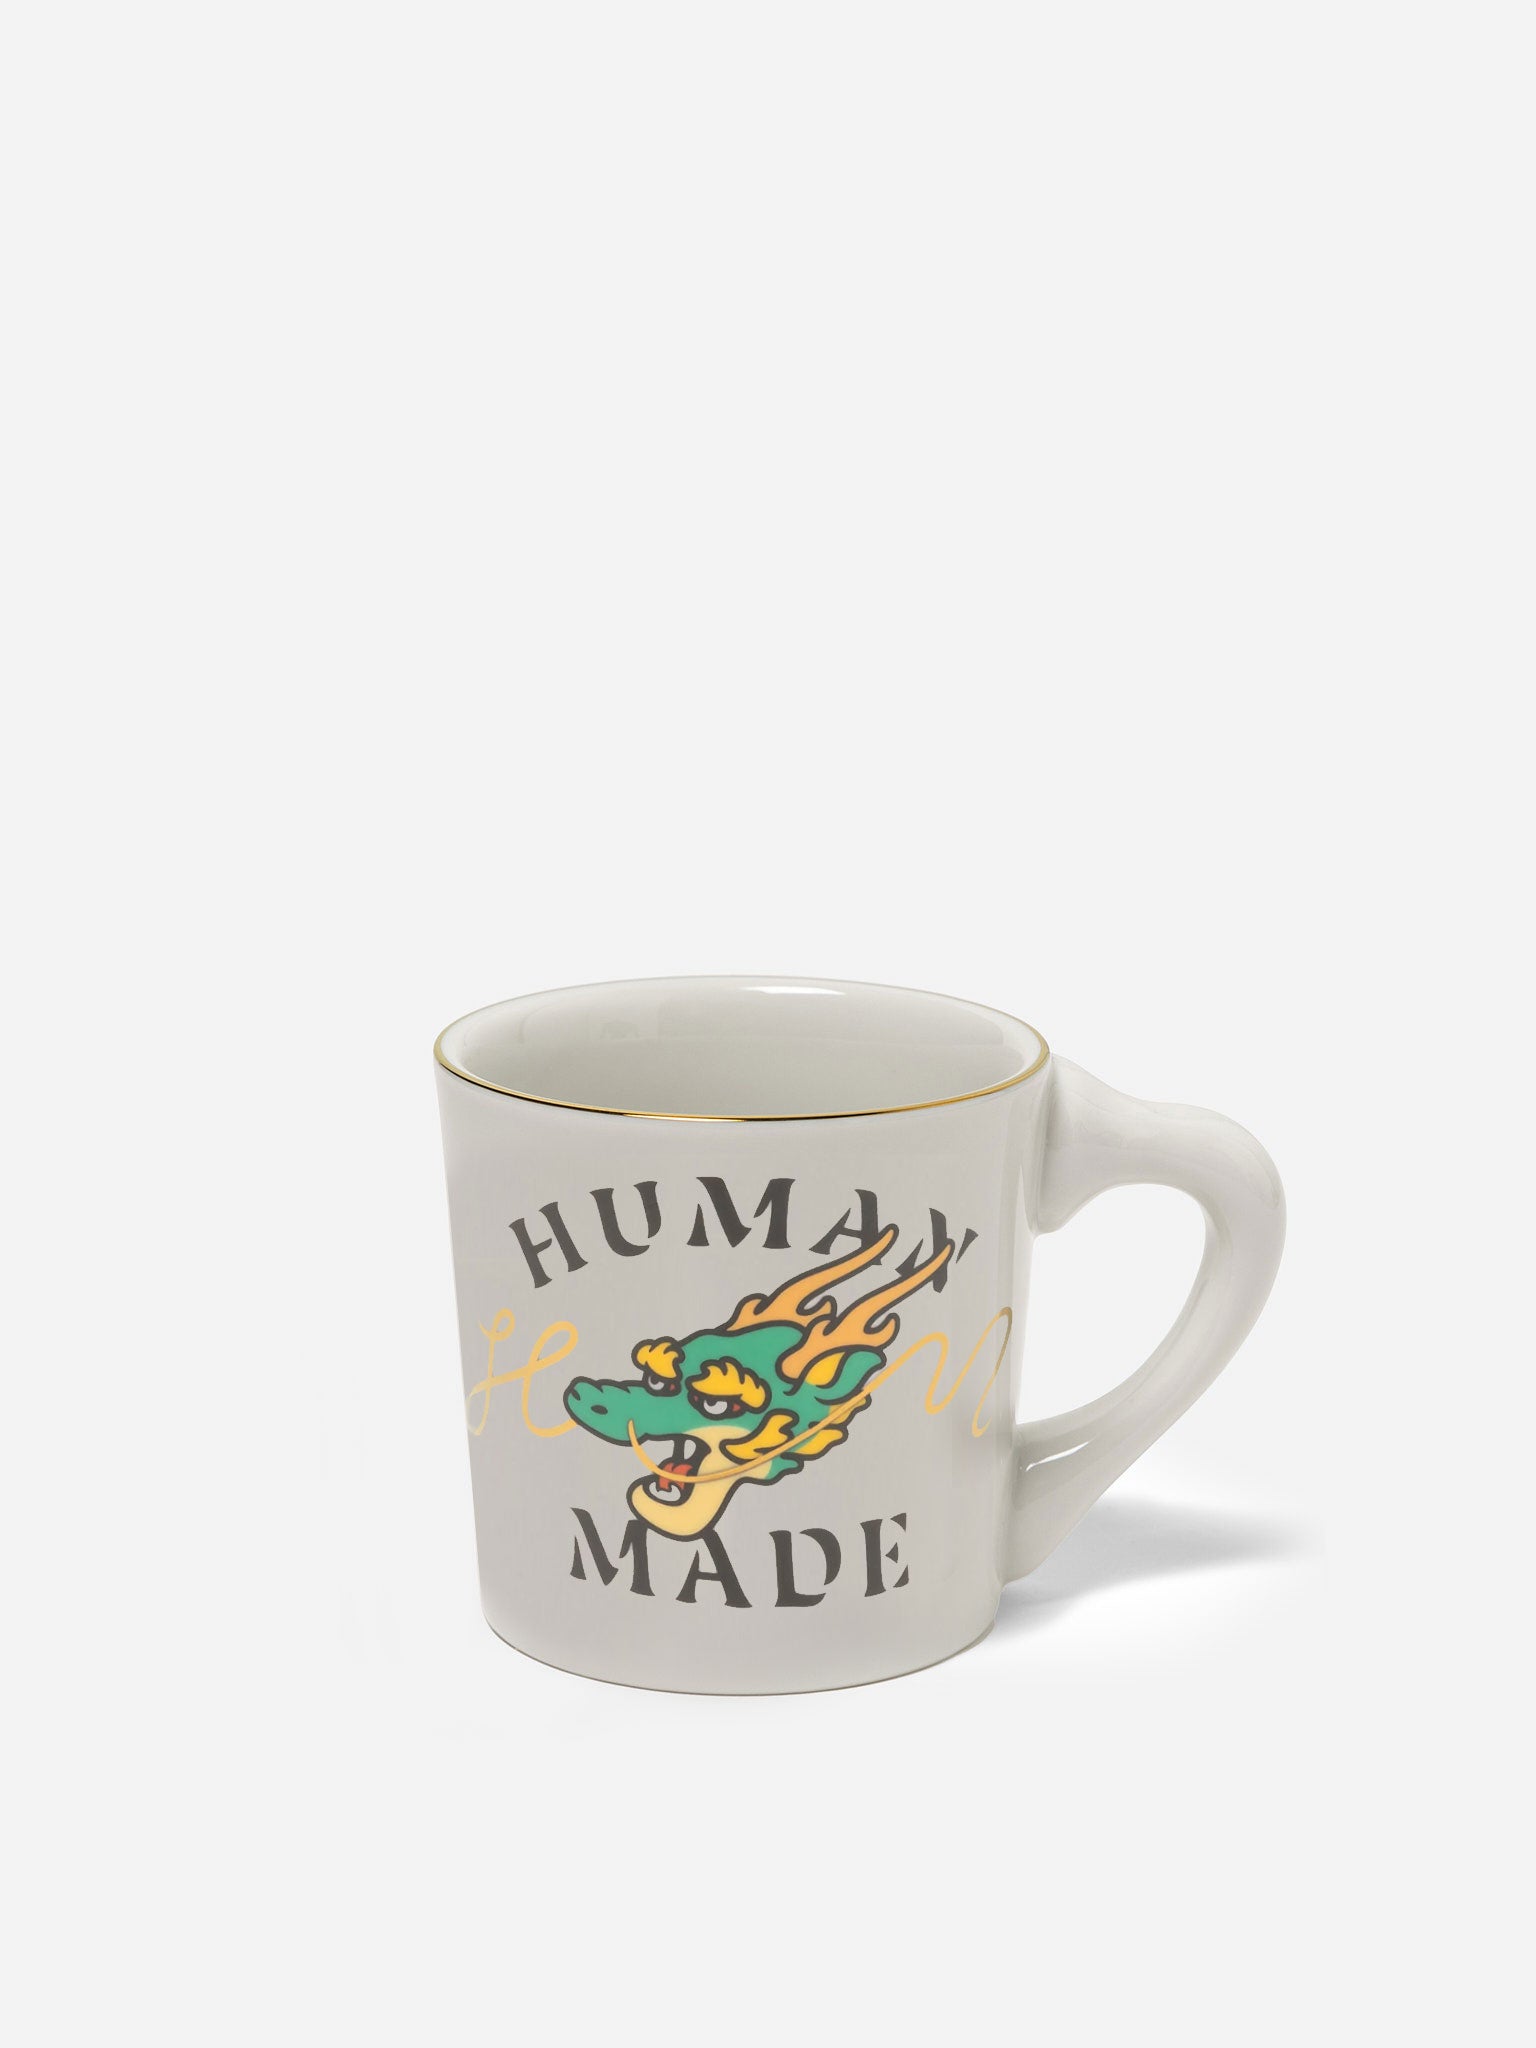 Human Made Lifestyle – OALLERY